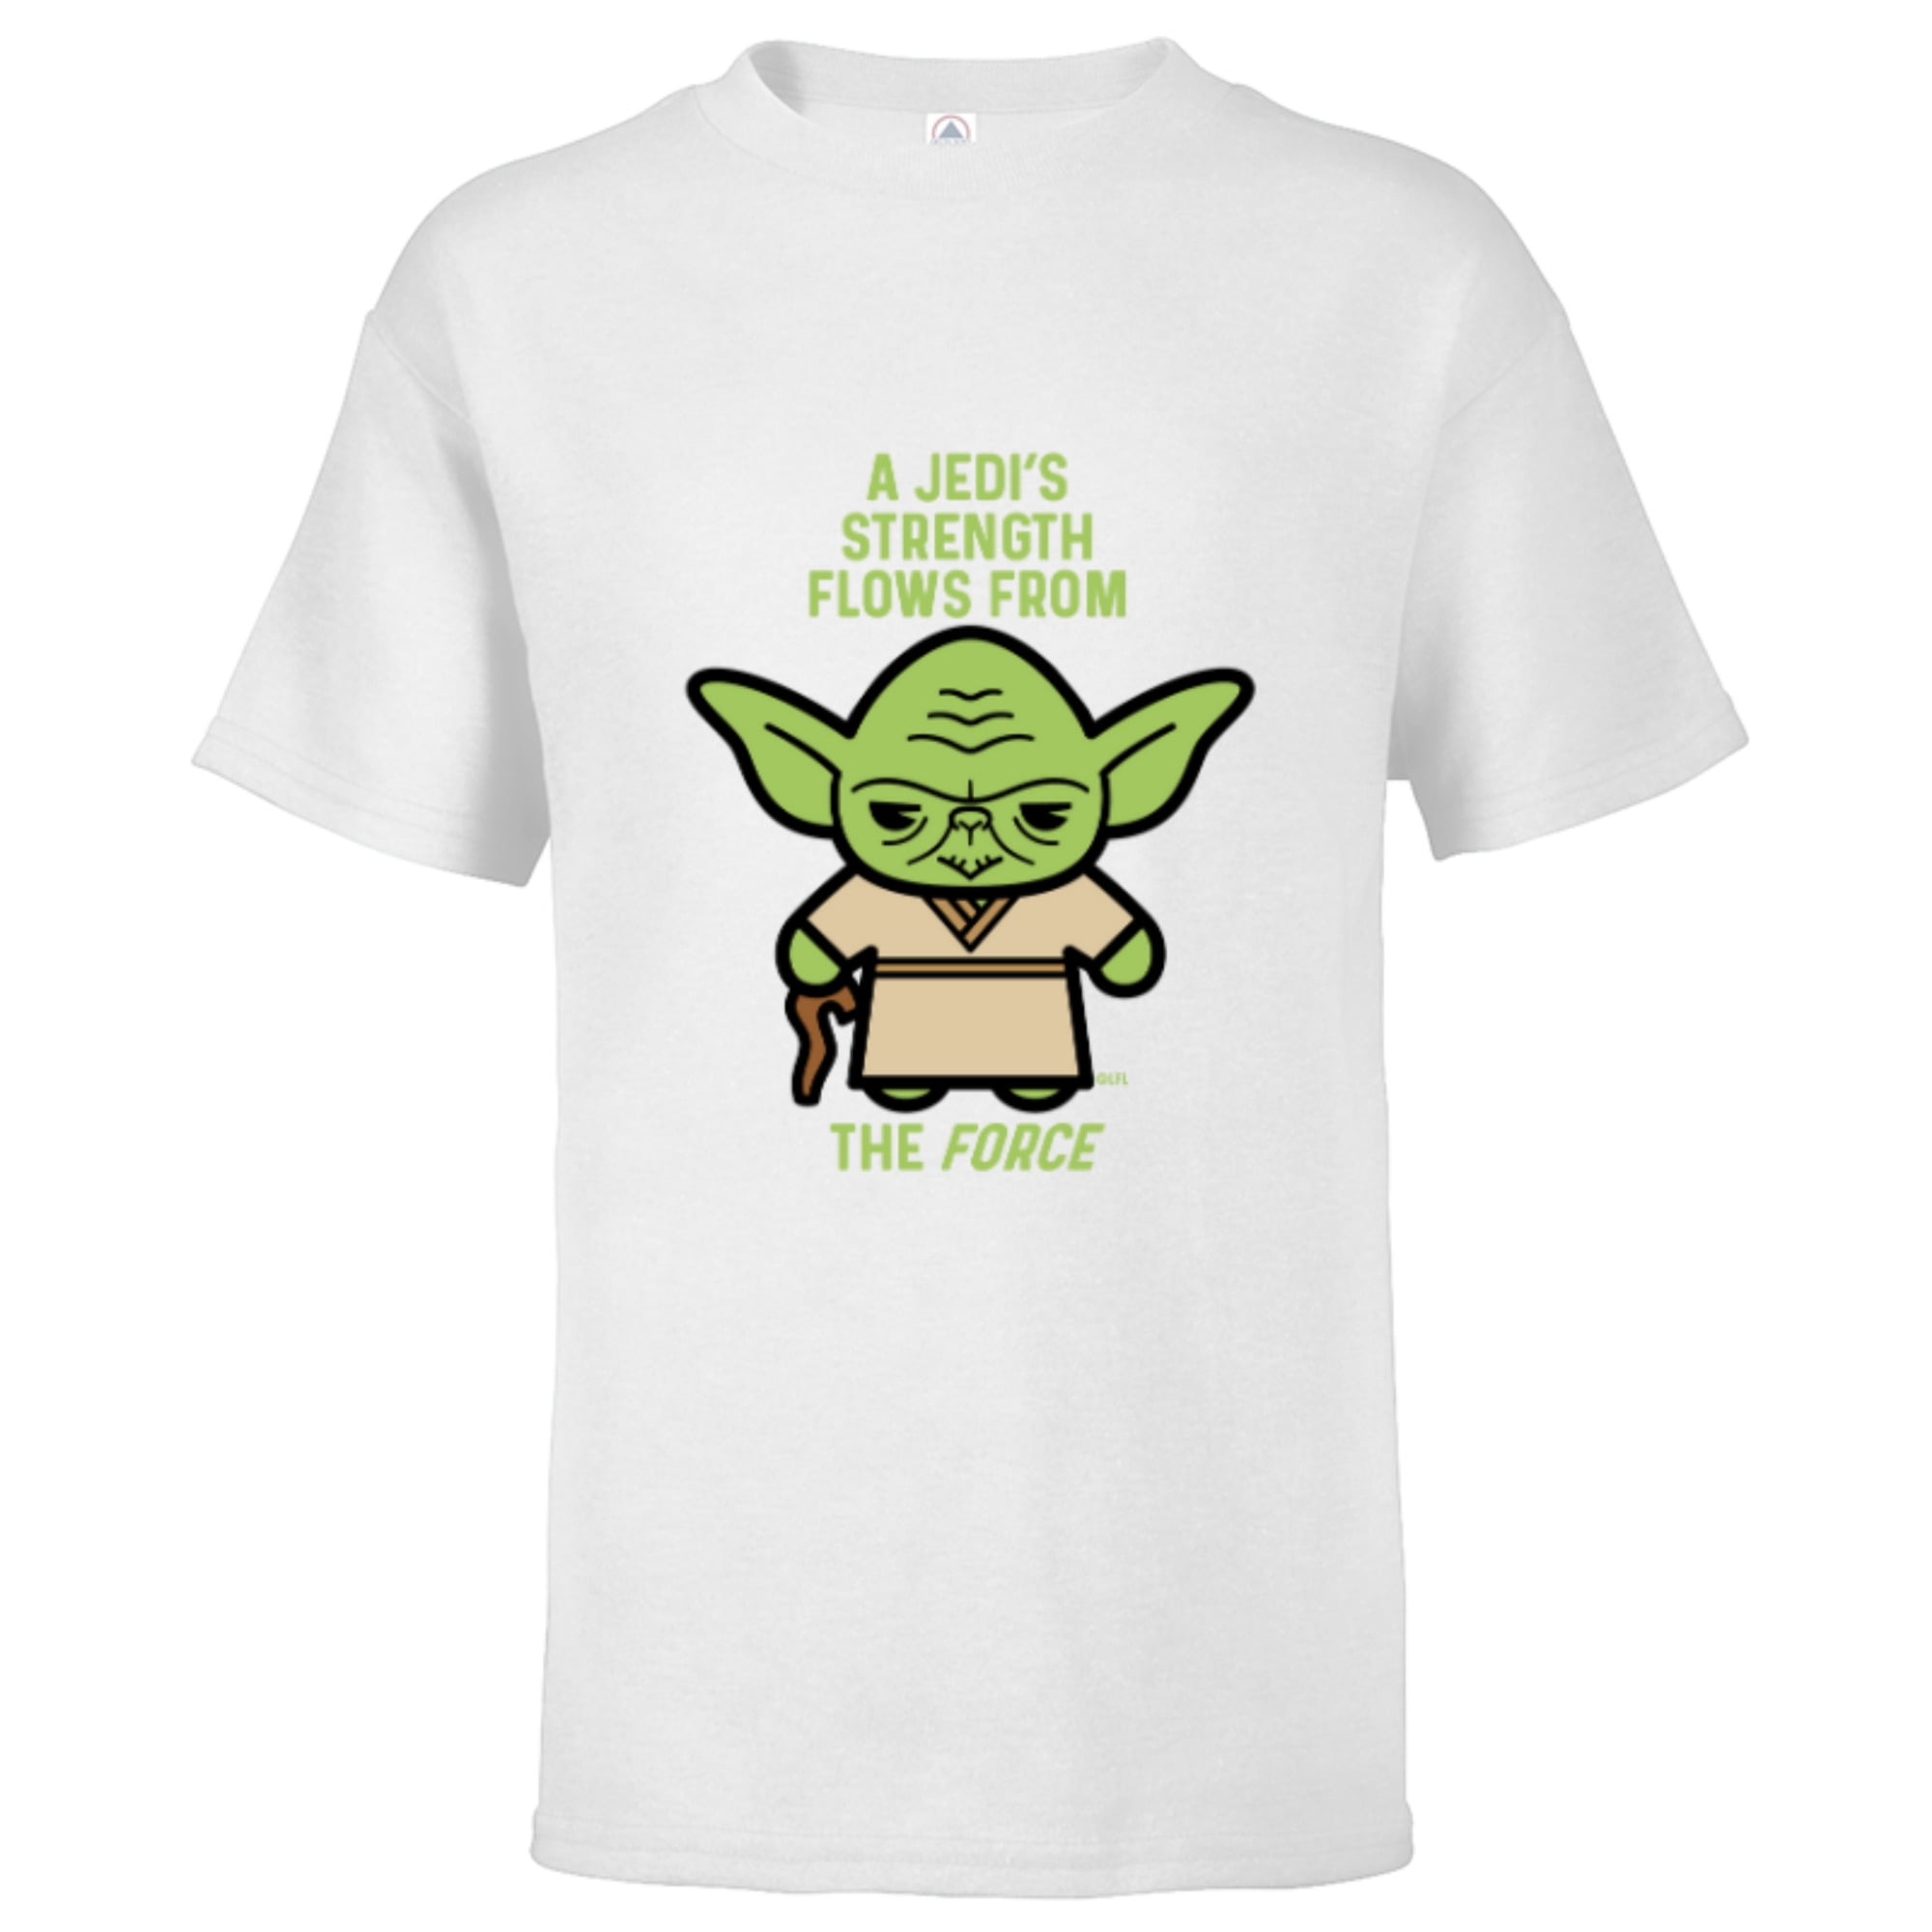 Star Wars Short Kids Quote Flows for - - Customized-White from the Force T -Shirt A Sleeve Jedi\'s Strength Yoda